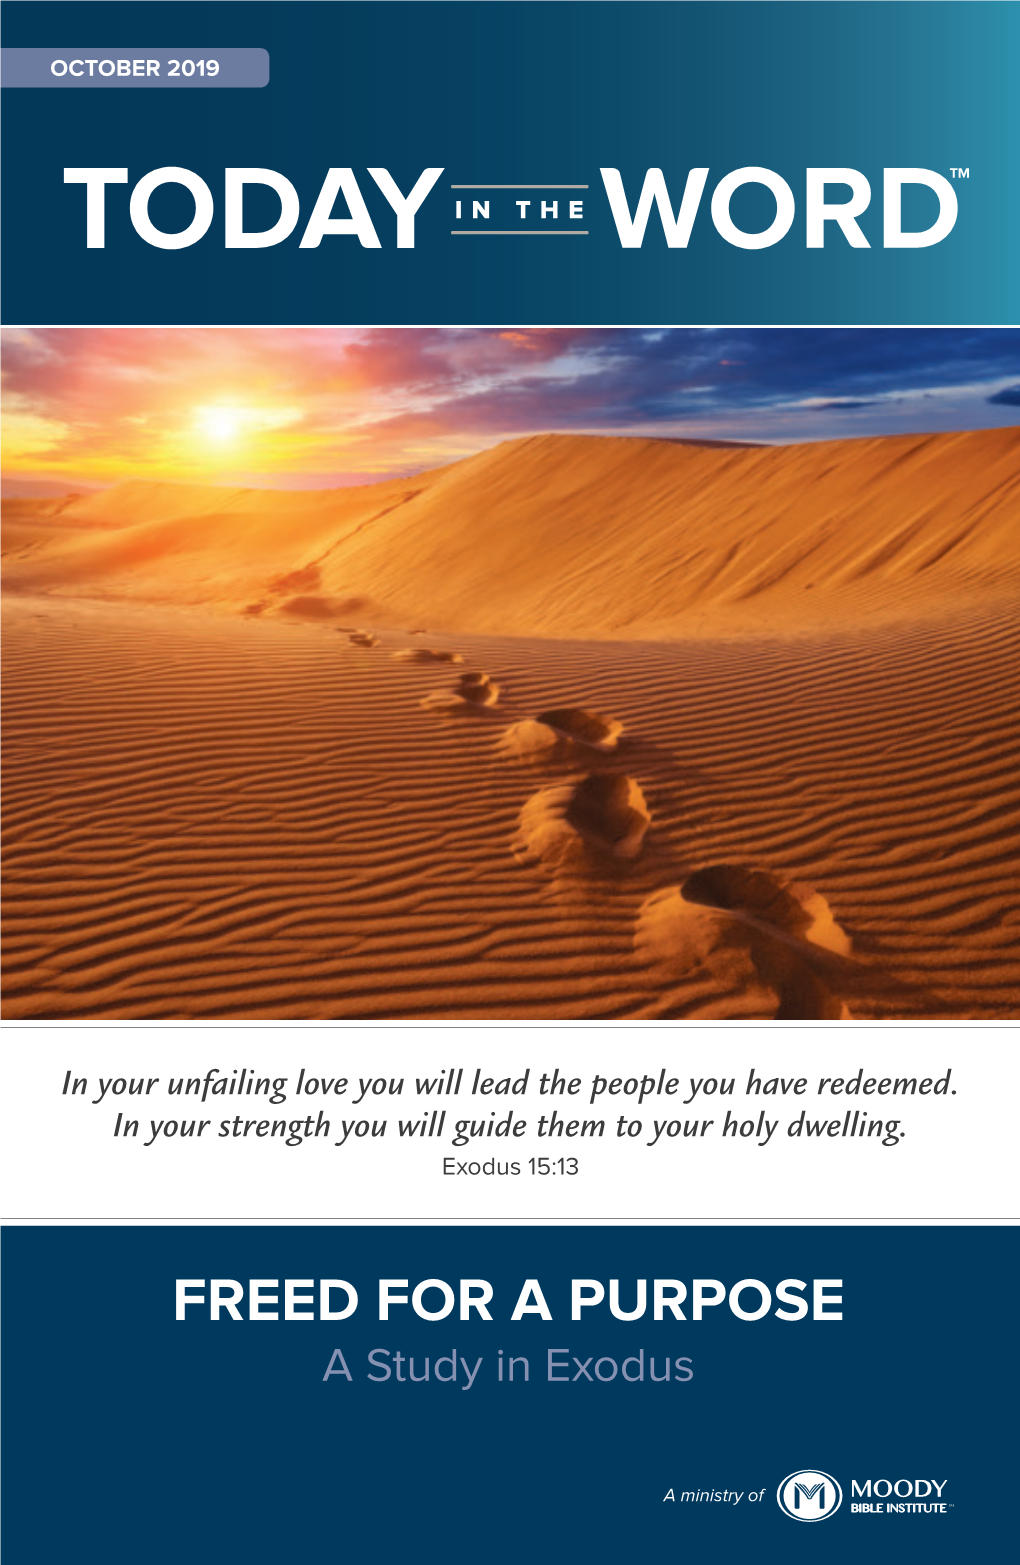 FREED for a PURPOSE a Study in Exodus